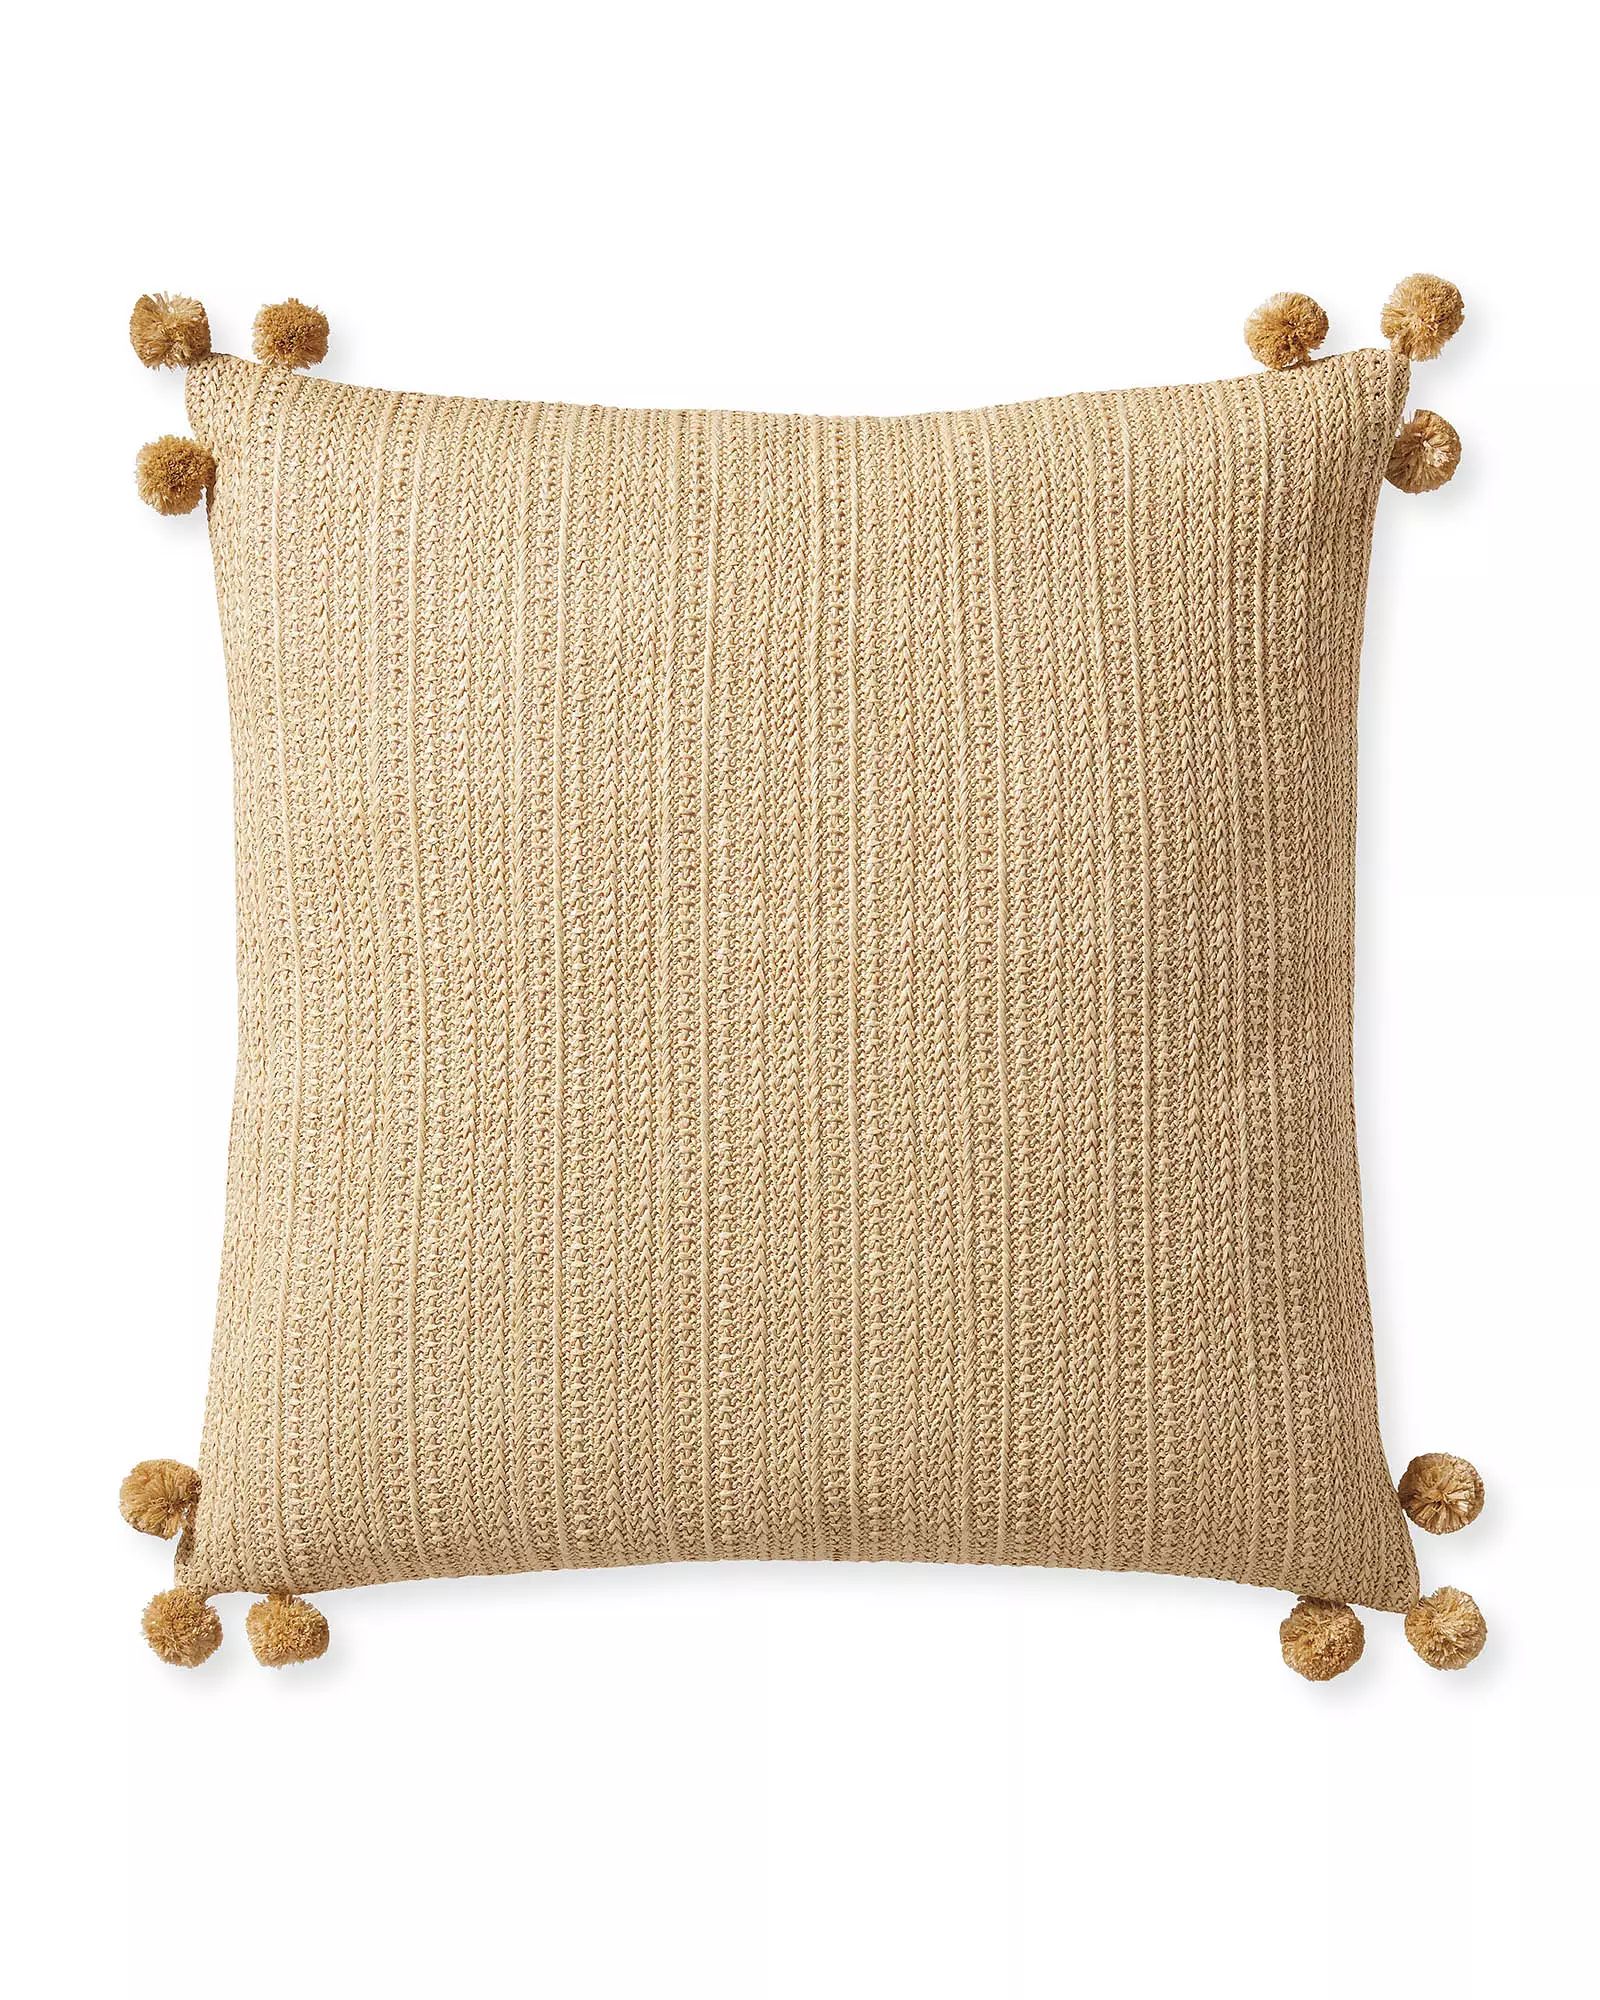 Salerno Pillow Cover | Serena and Lily